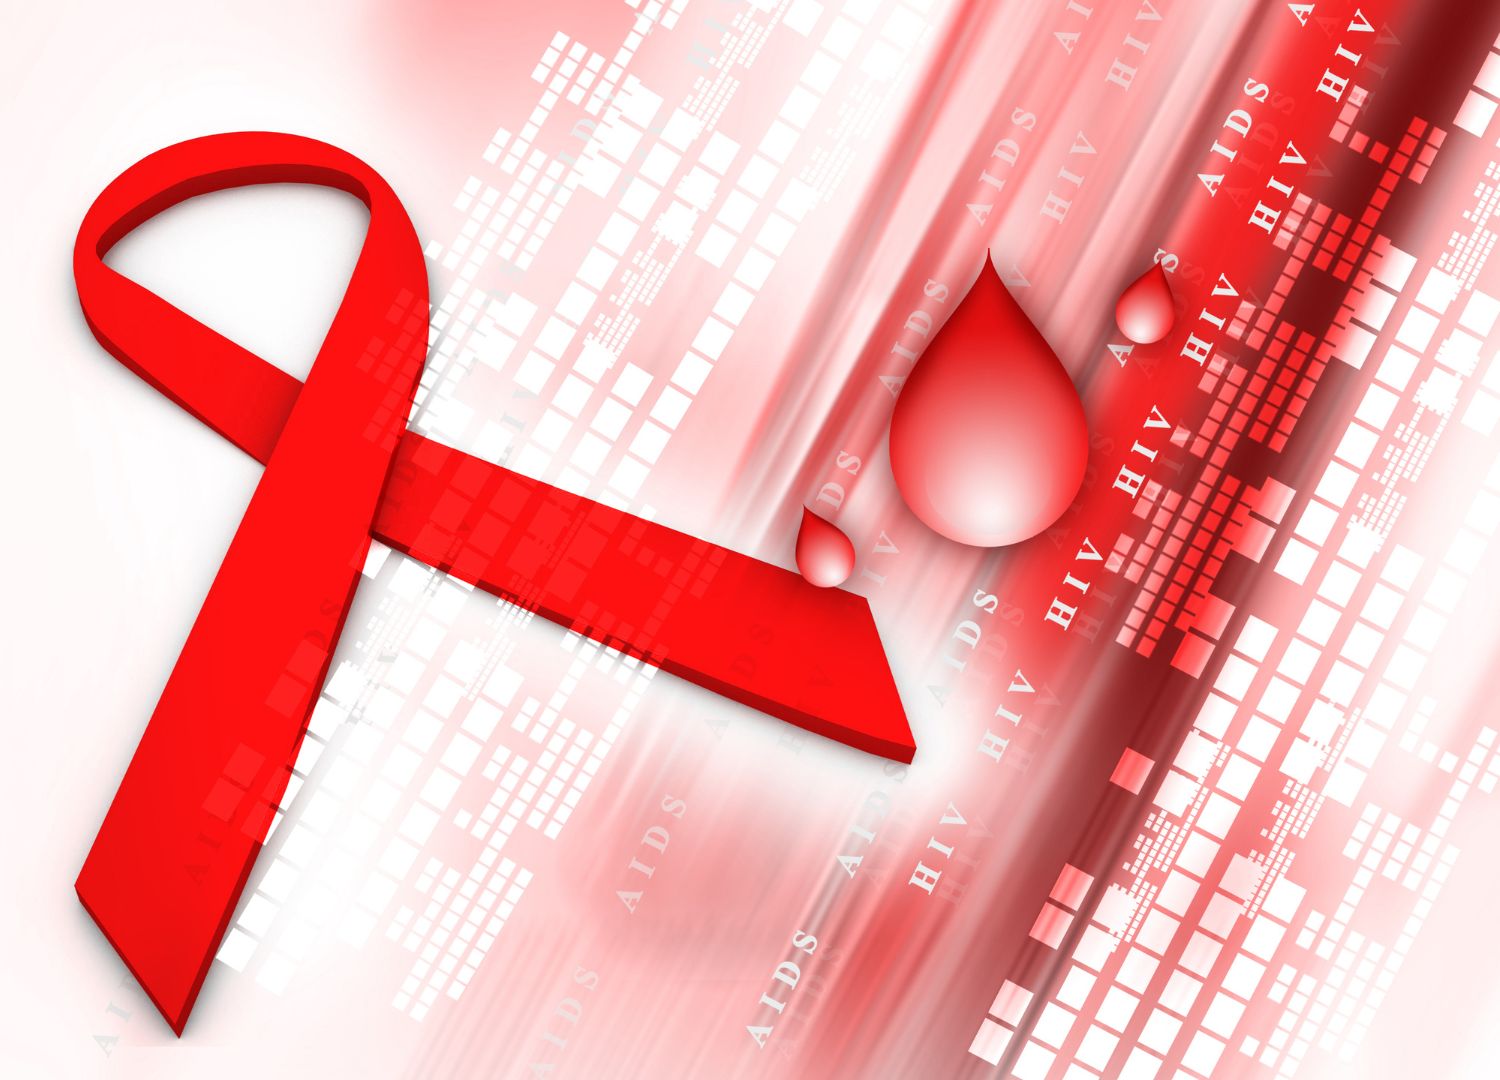 Misconceptions about HIV/AIDS